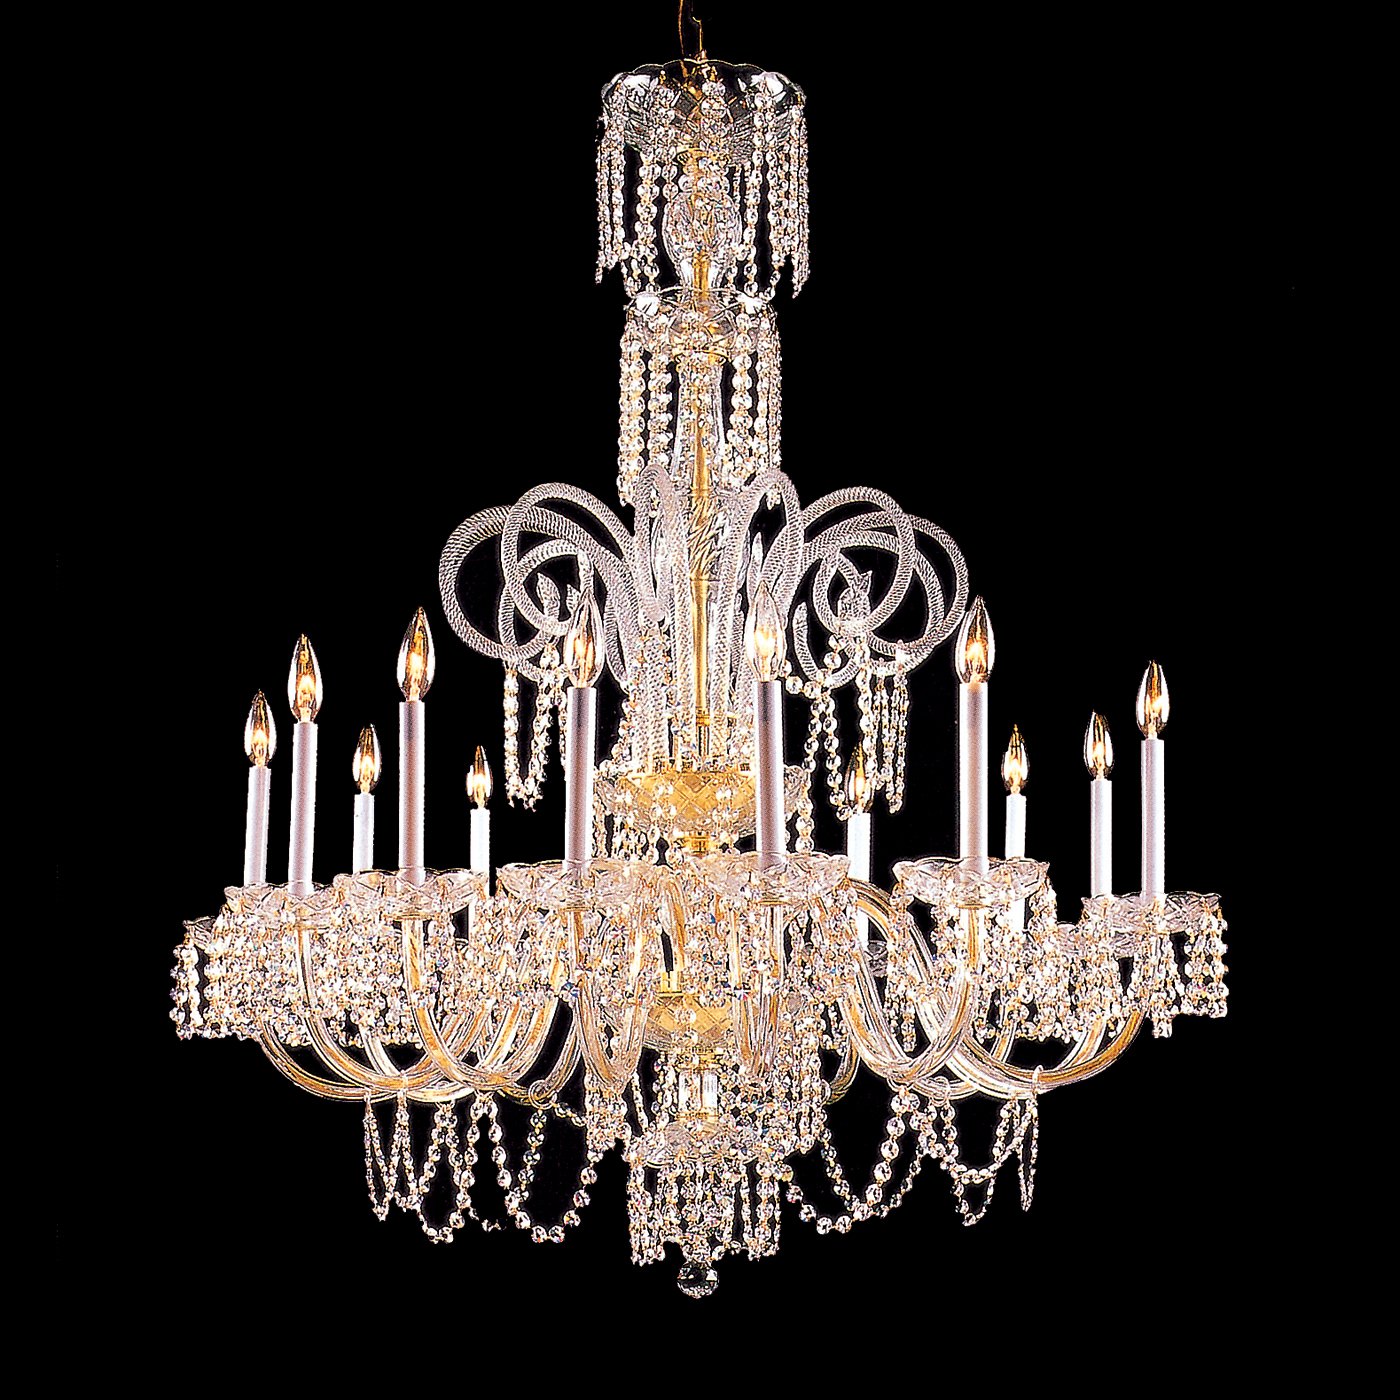 Home Decor Diary: Crystal Chandeliers for Traditional Dining Rooms